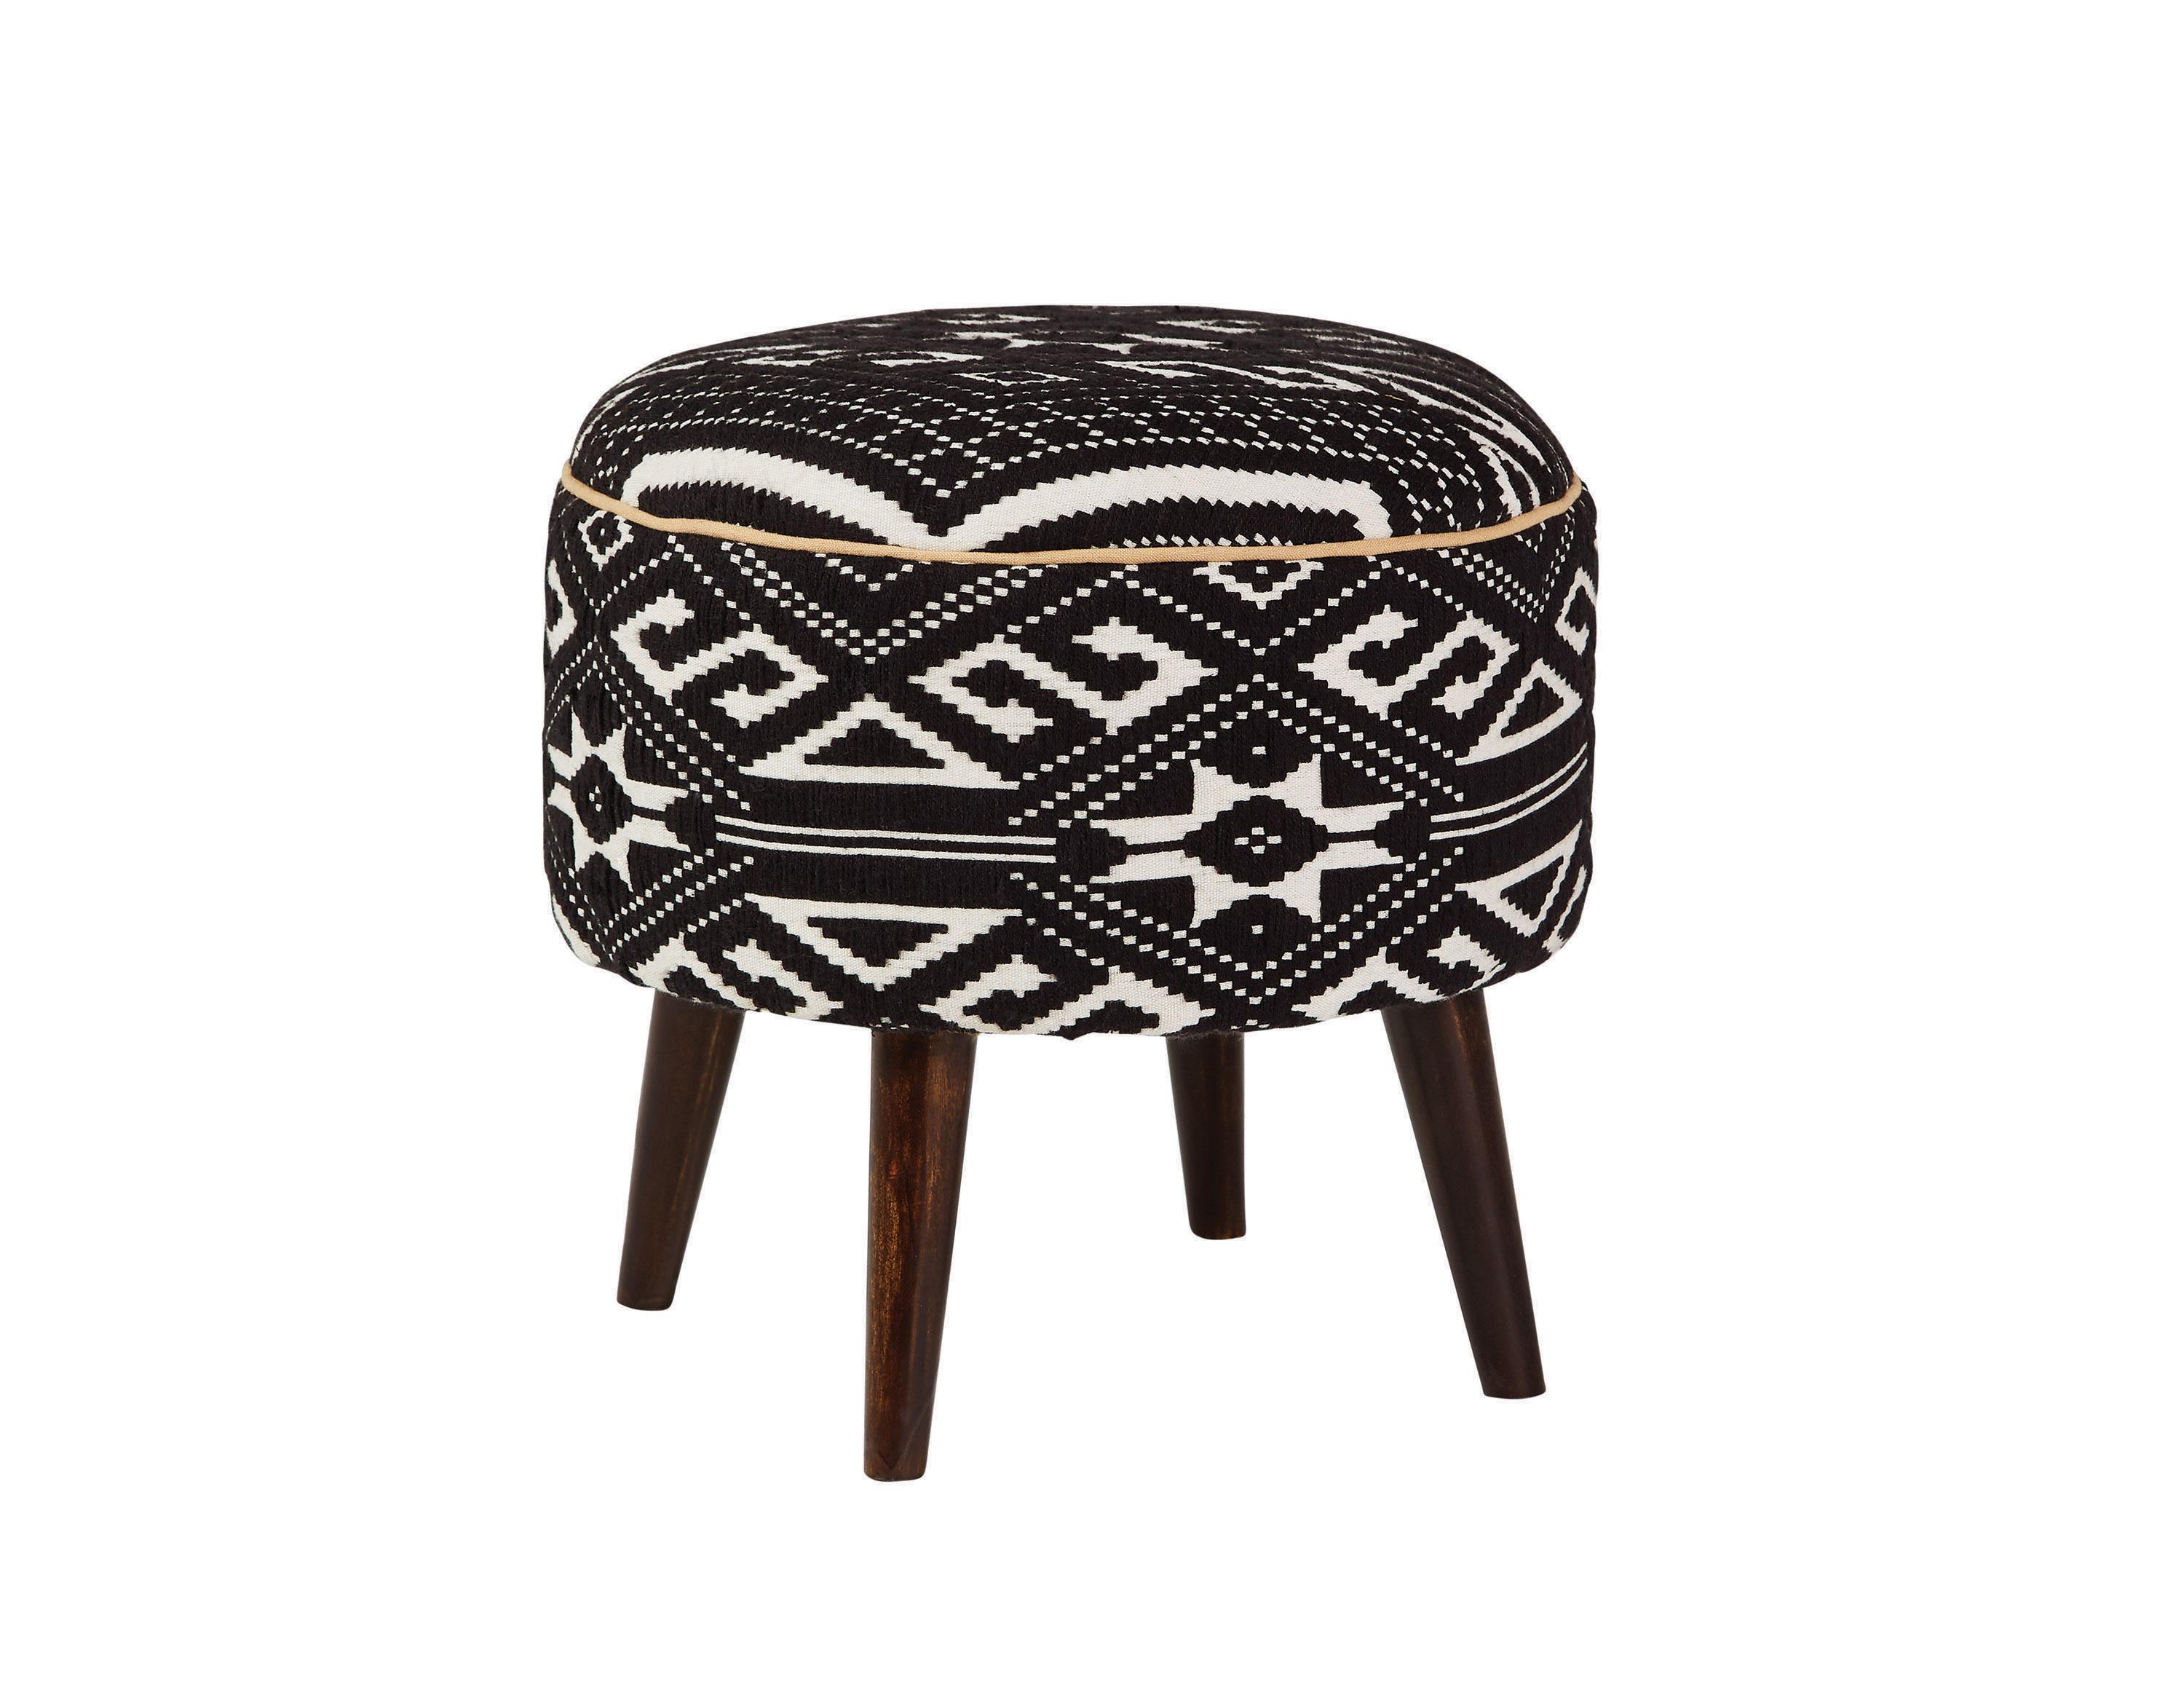 Transitional Ottoman 918492 918492 in White, Black 